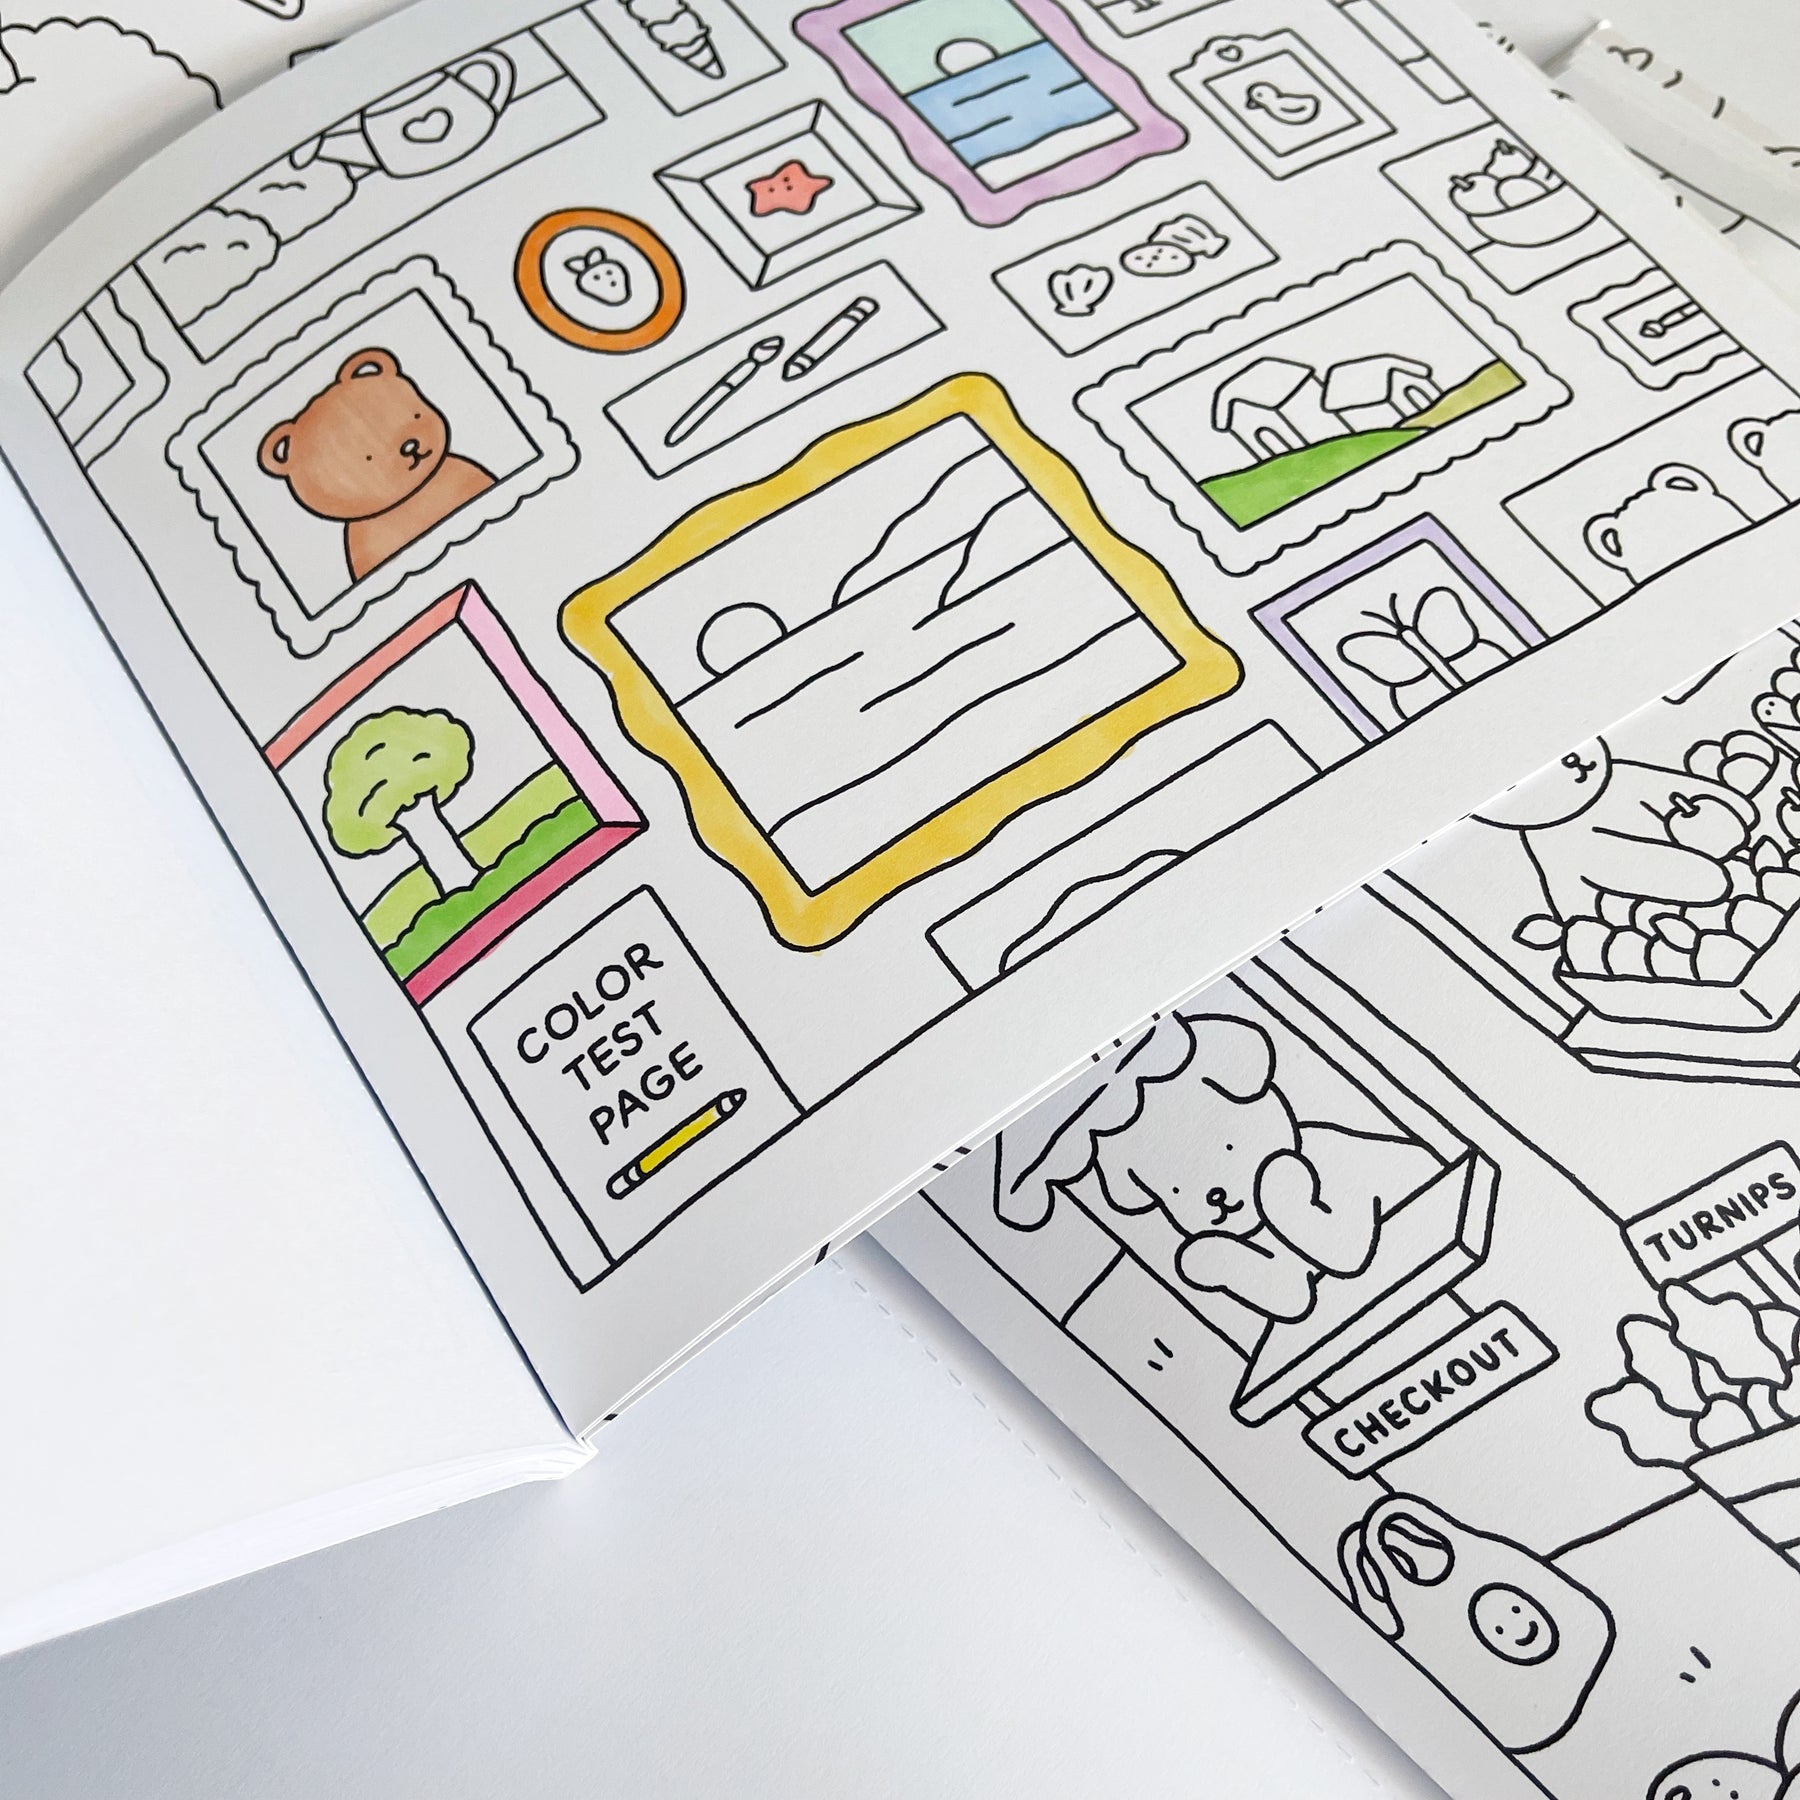 love this page in the new @bobbiegoods! coloring book 🧸✨🪸🕯️🐠 #bobb, bobbie goods